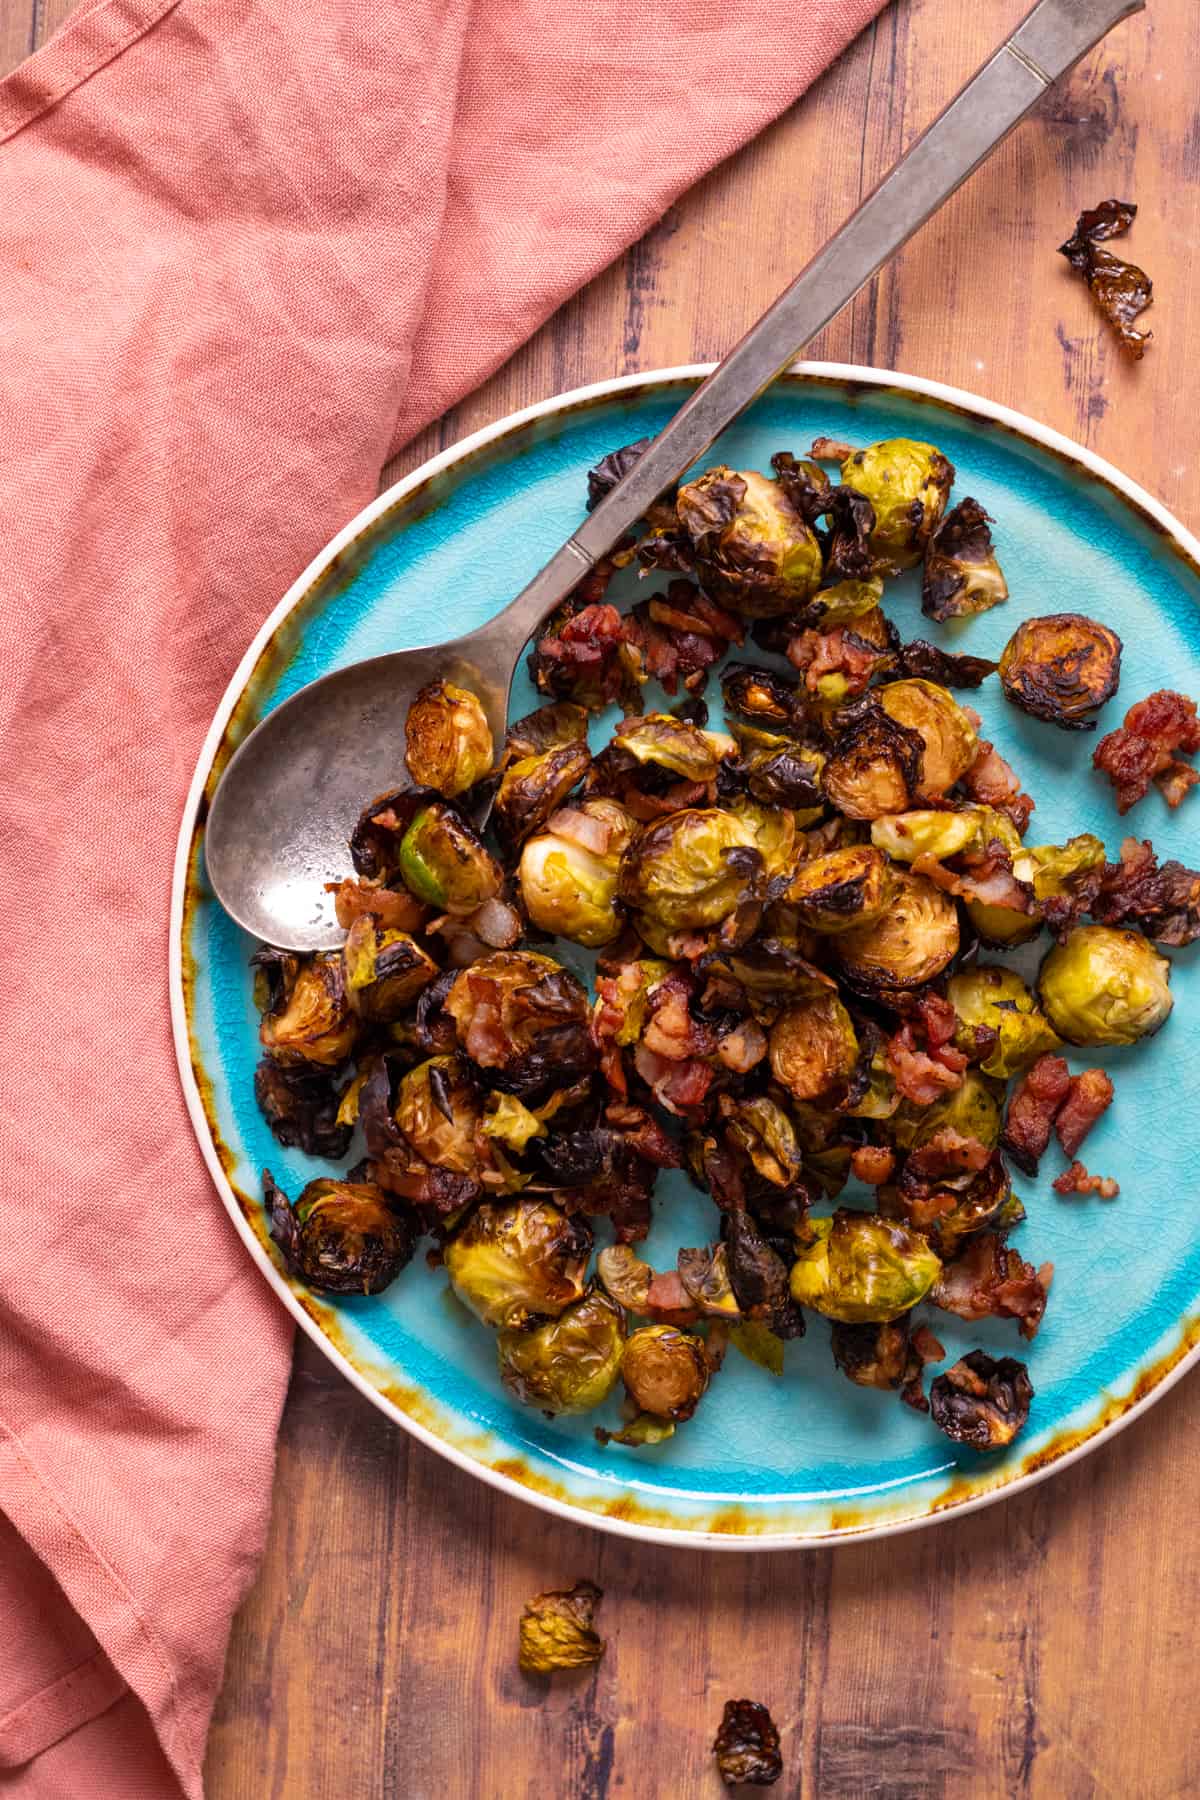 brussel sprouts with bacon on a blue plate